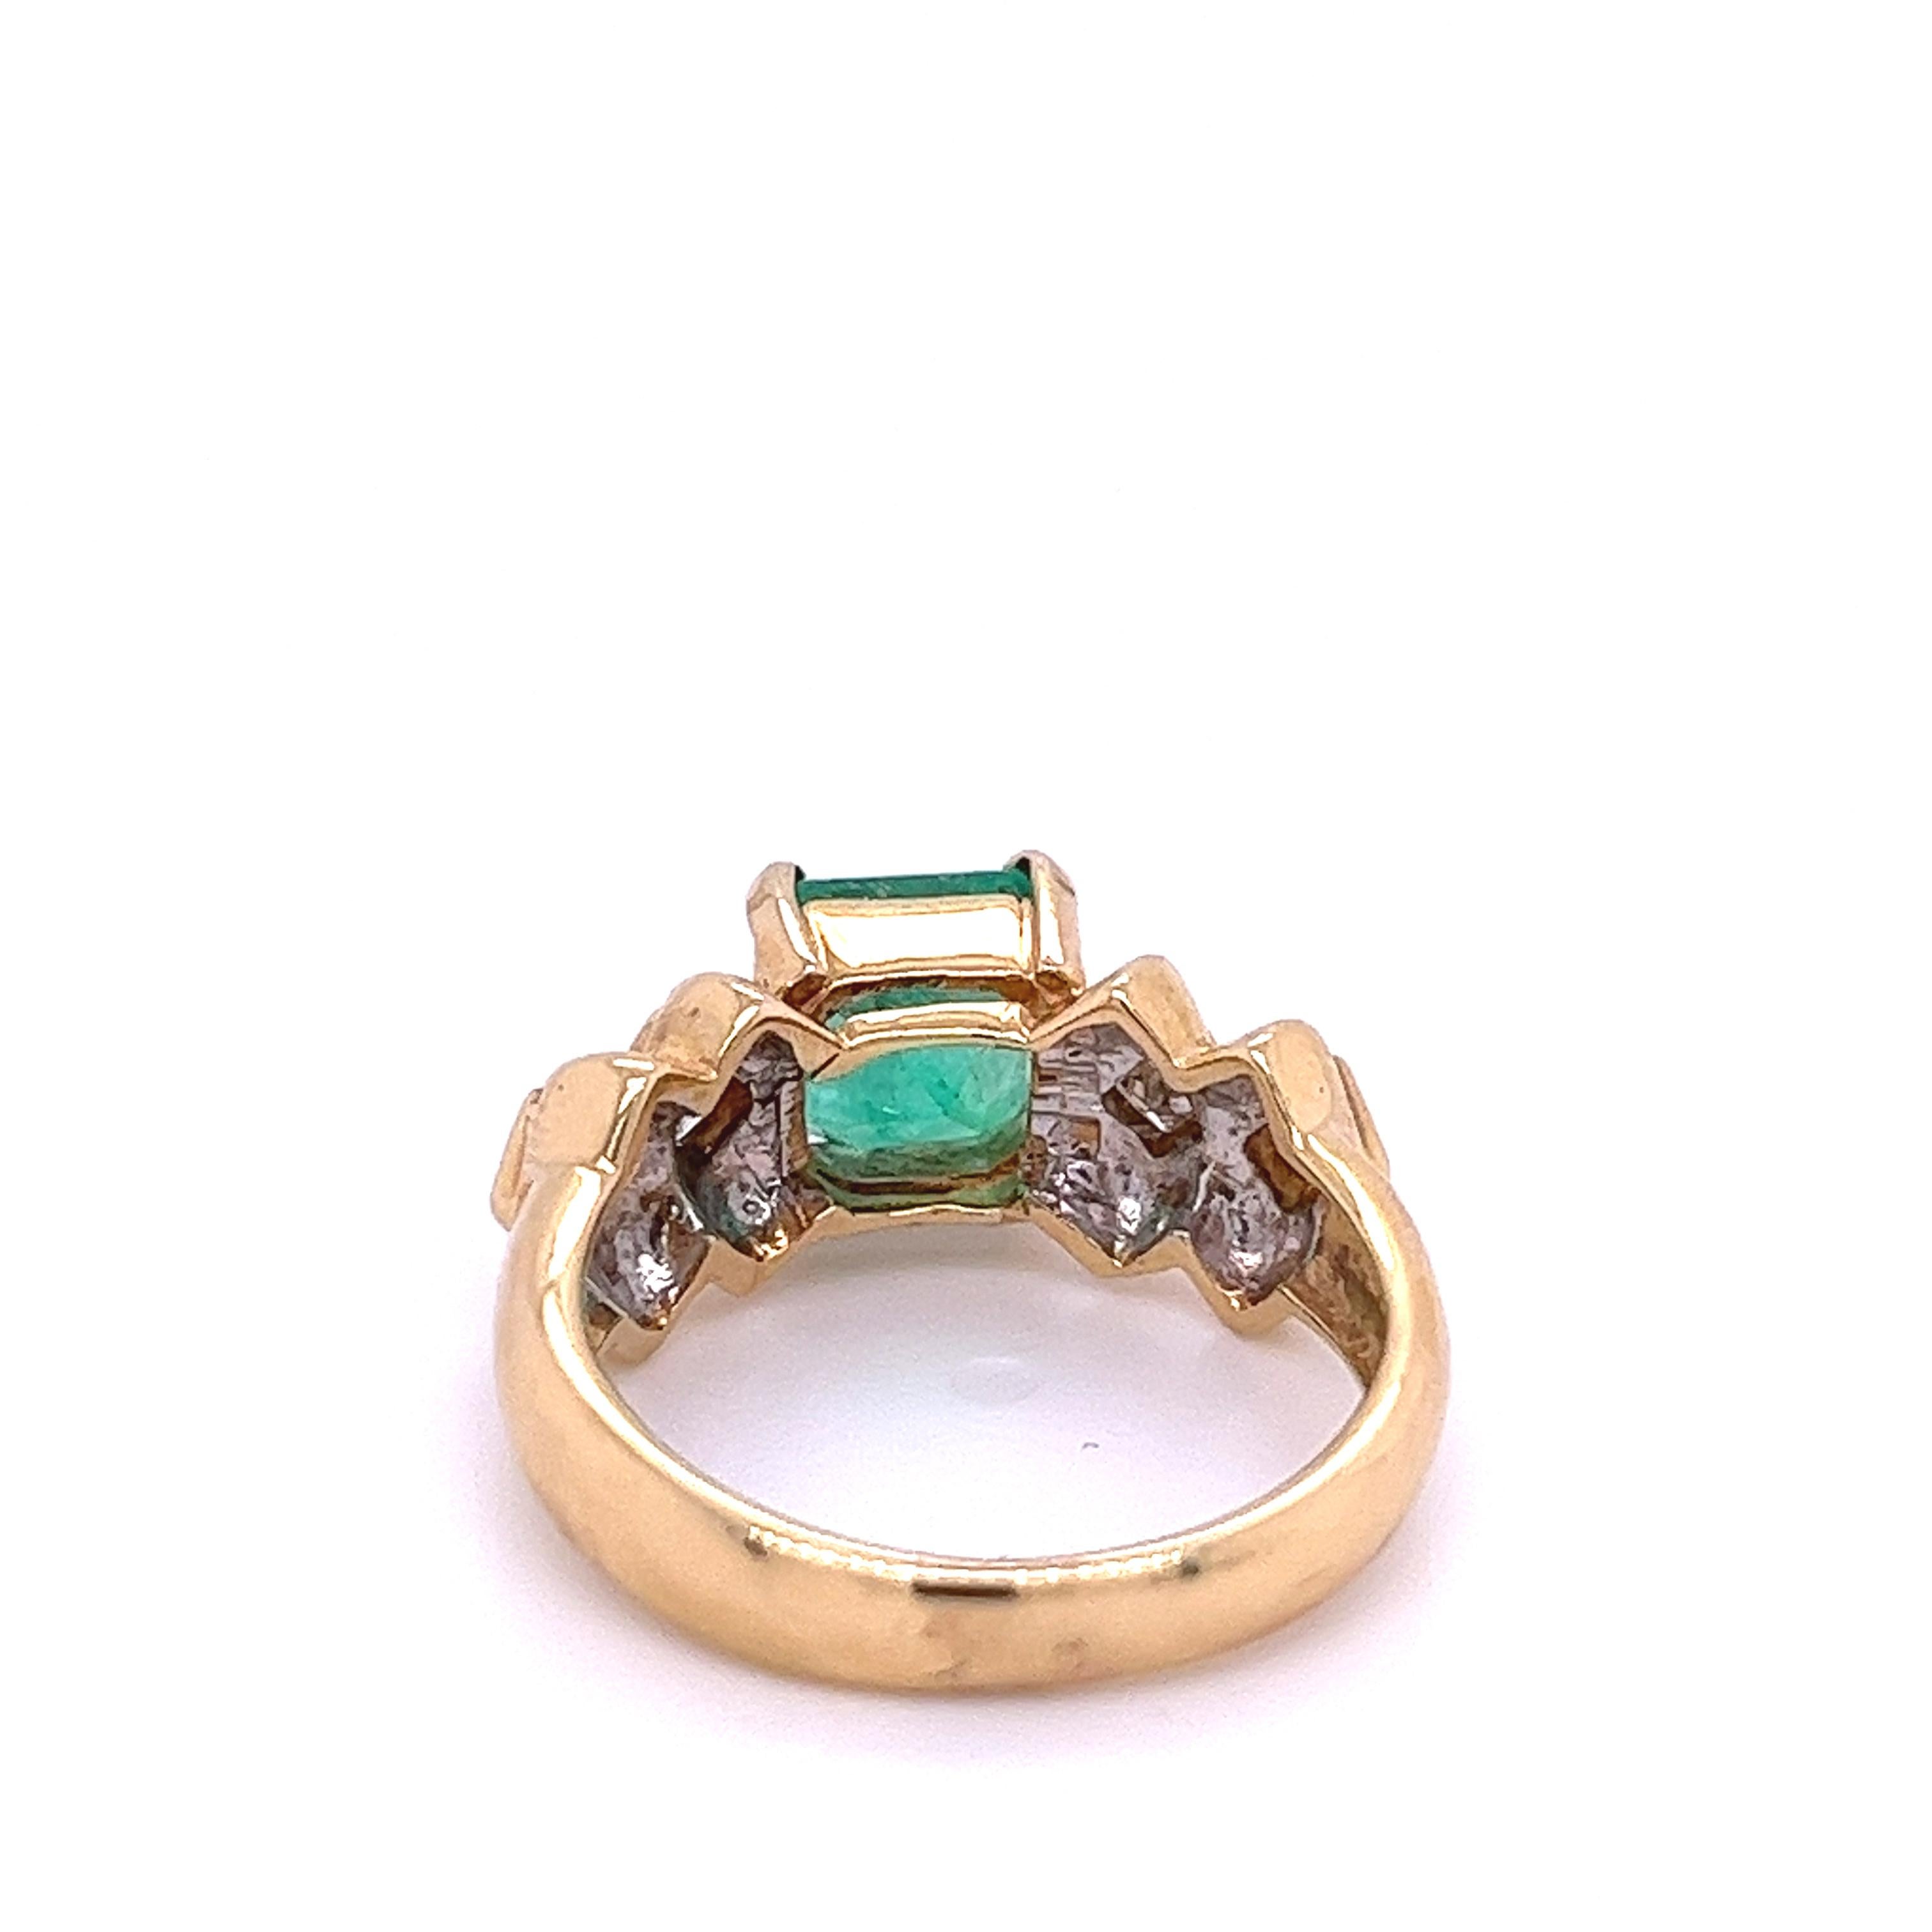 Emerald Cut 1.84 Carat Colombian Emerald and Princess Cut Diamond in 14k Yellow Gold Ring For Sale